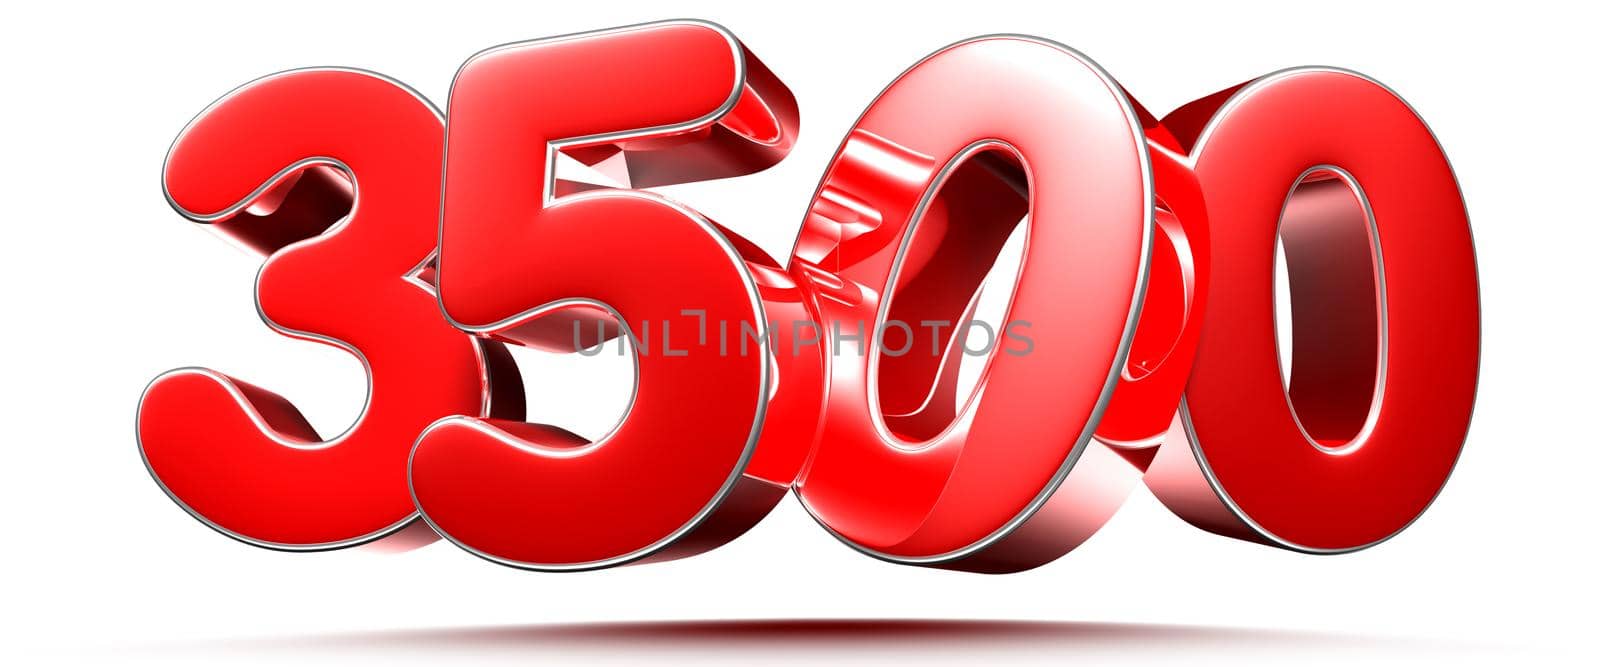 Rounded red numbers 3500 on white background 3D illustration with clipping path by thitimontoyai